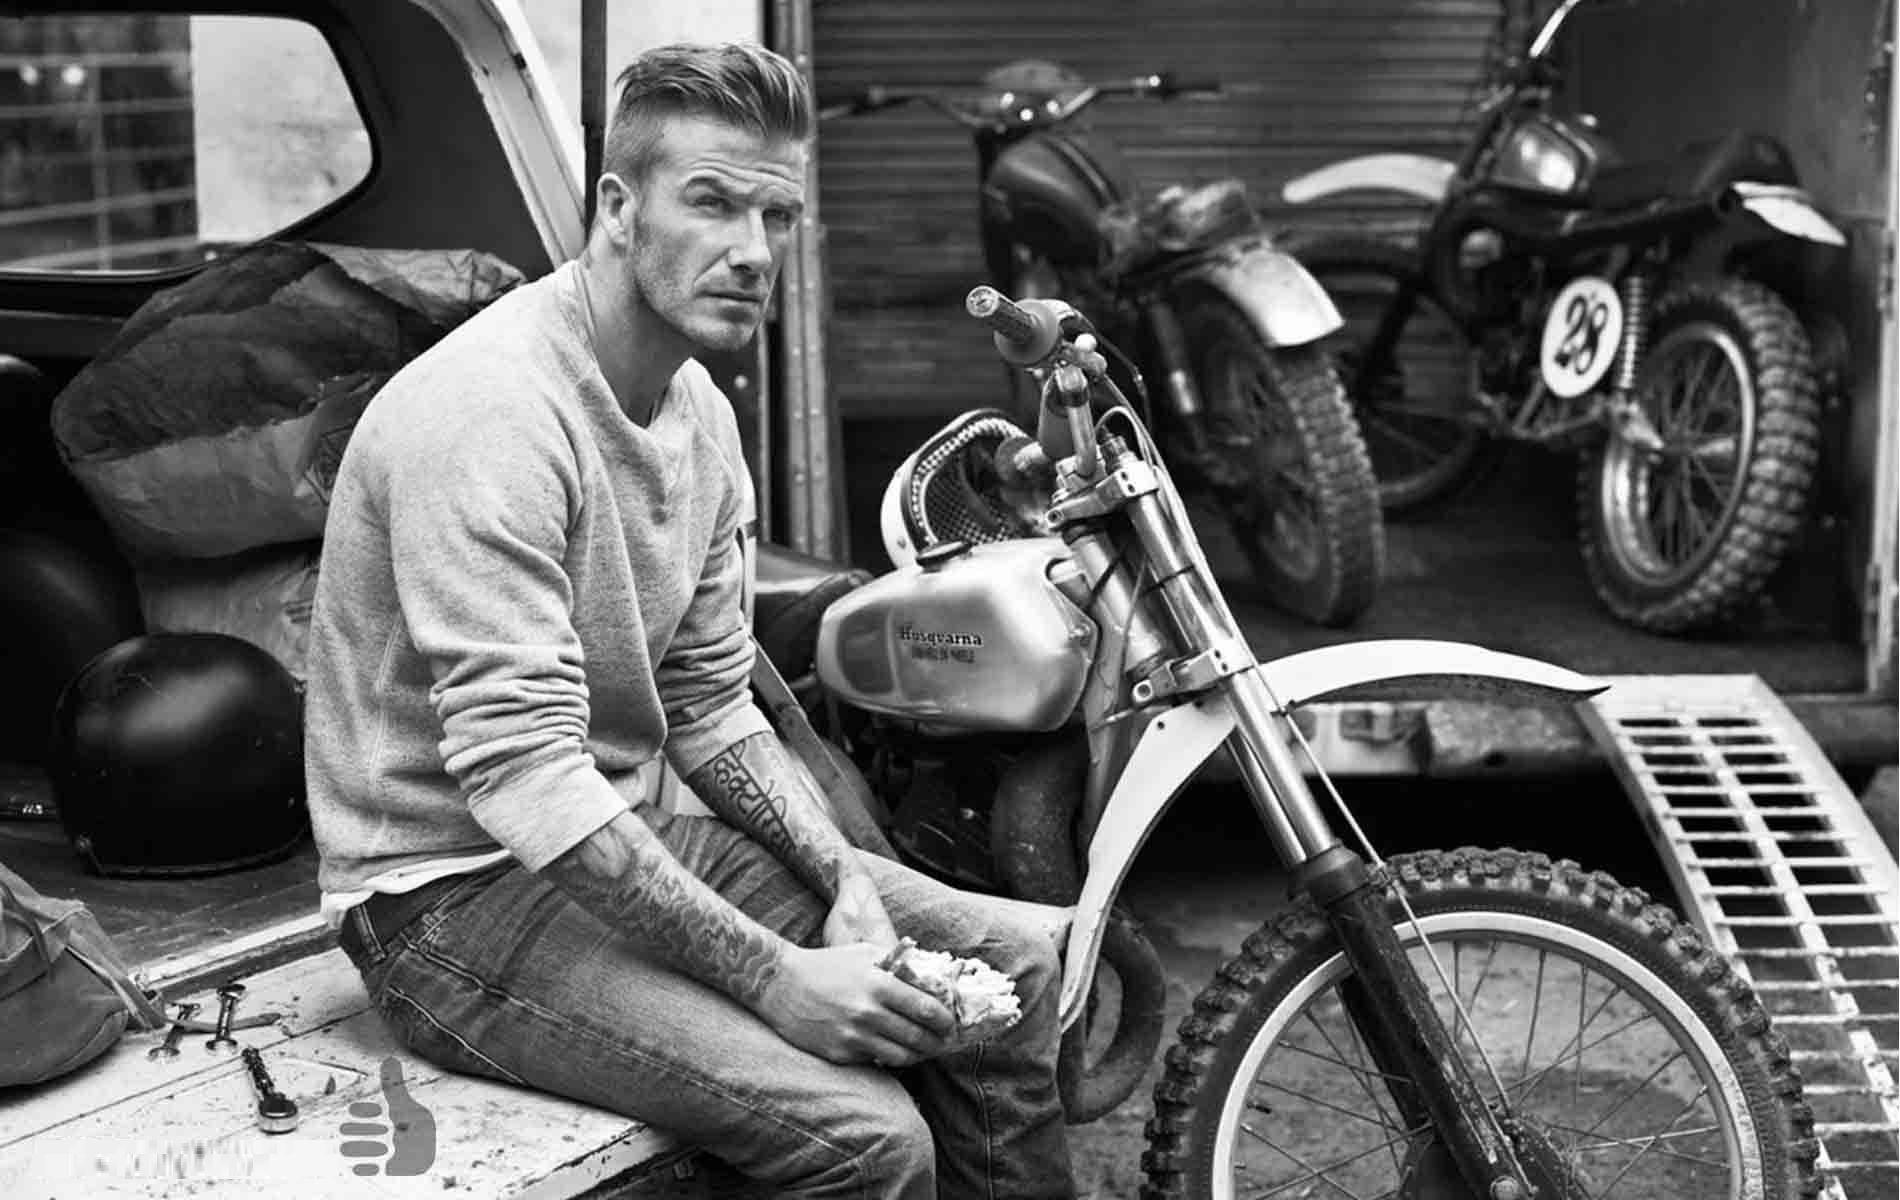 Free David Beckham Hd Wallpapers 2017 Image Widescreen Picture New